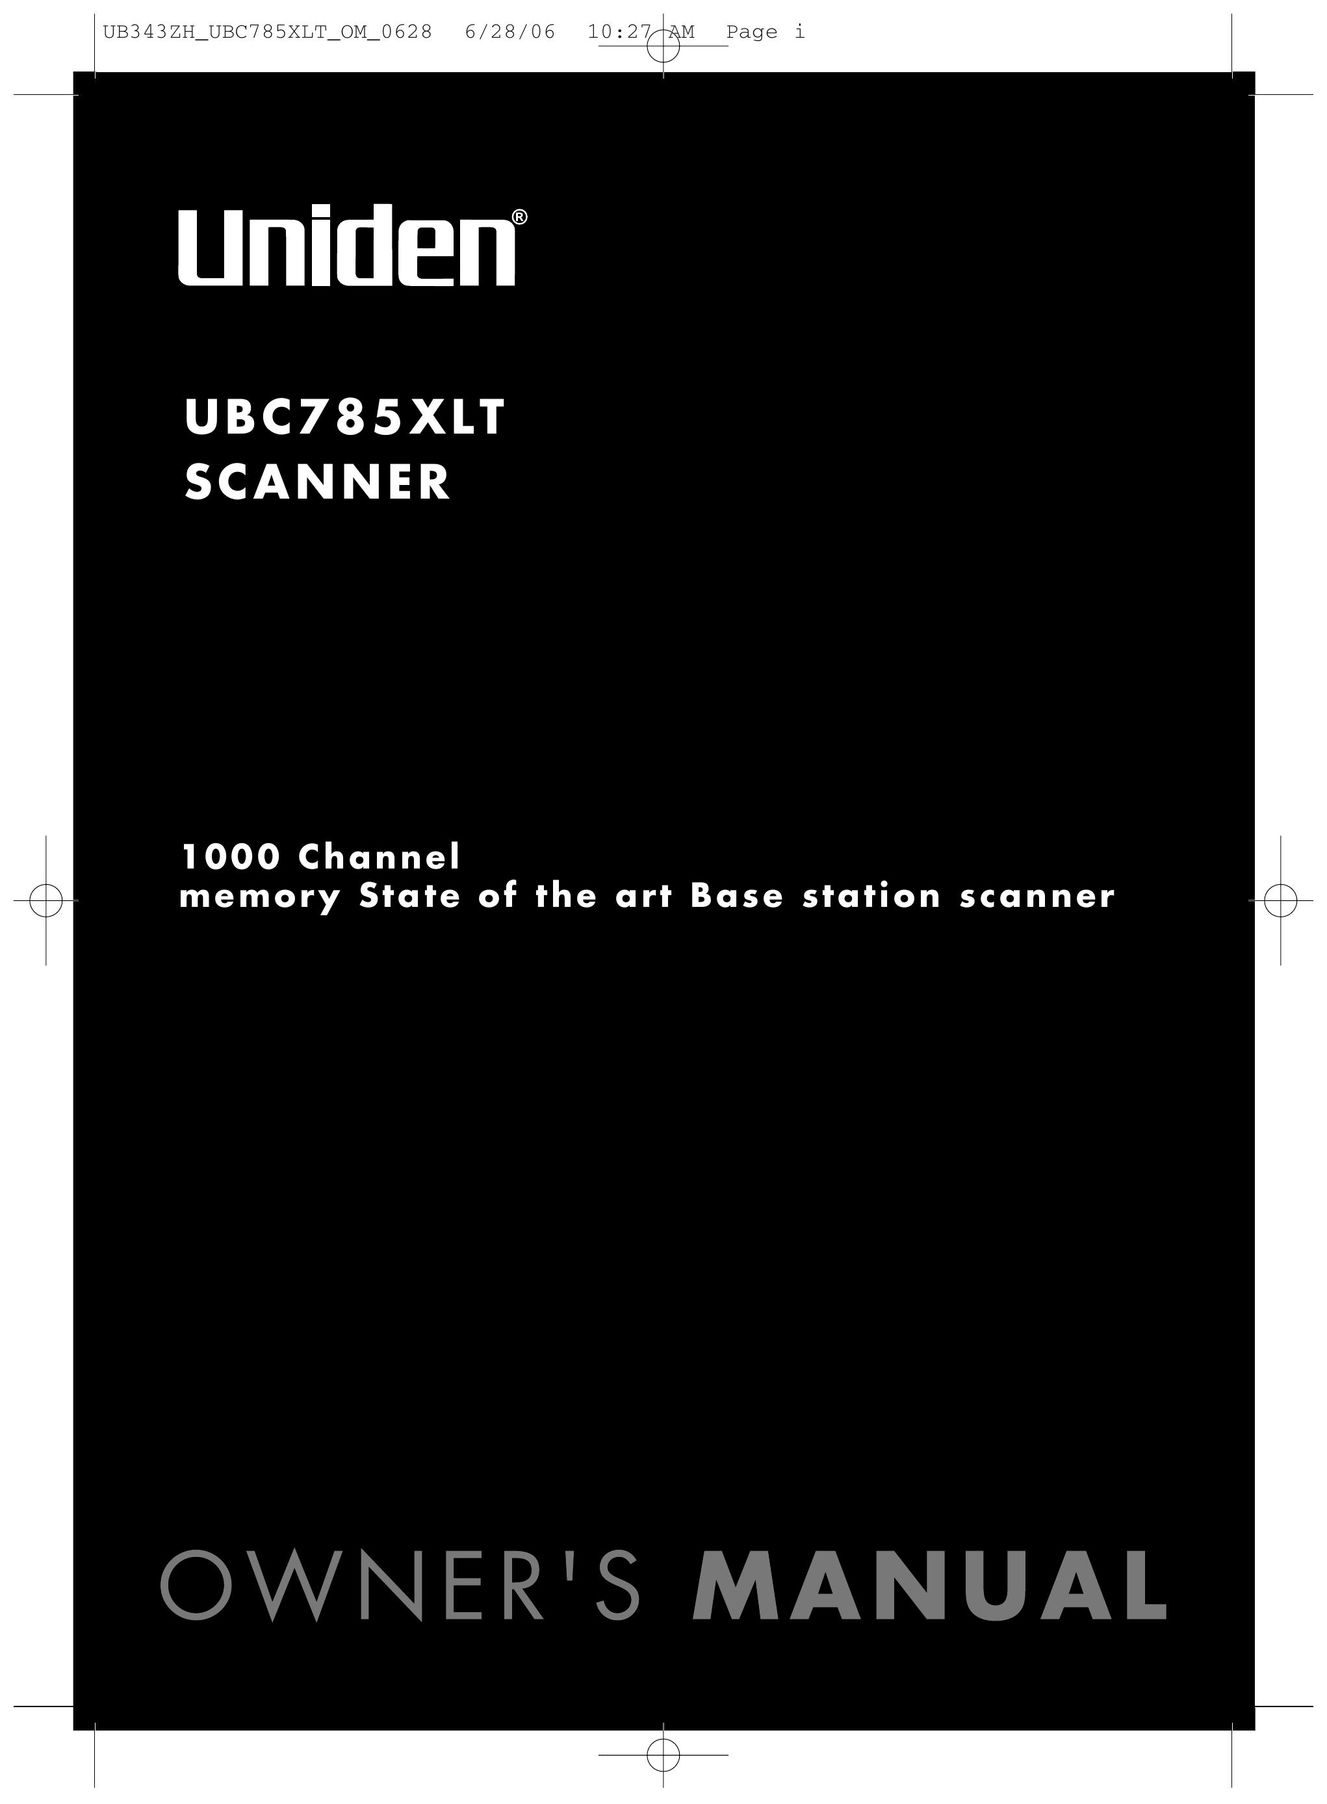 Uniden UBC785XLT All in One Printer User Manual